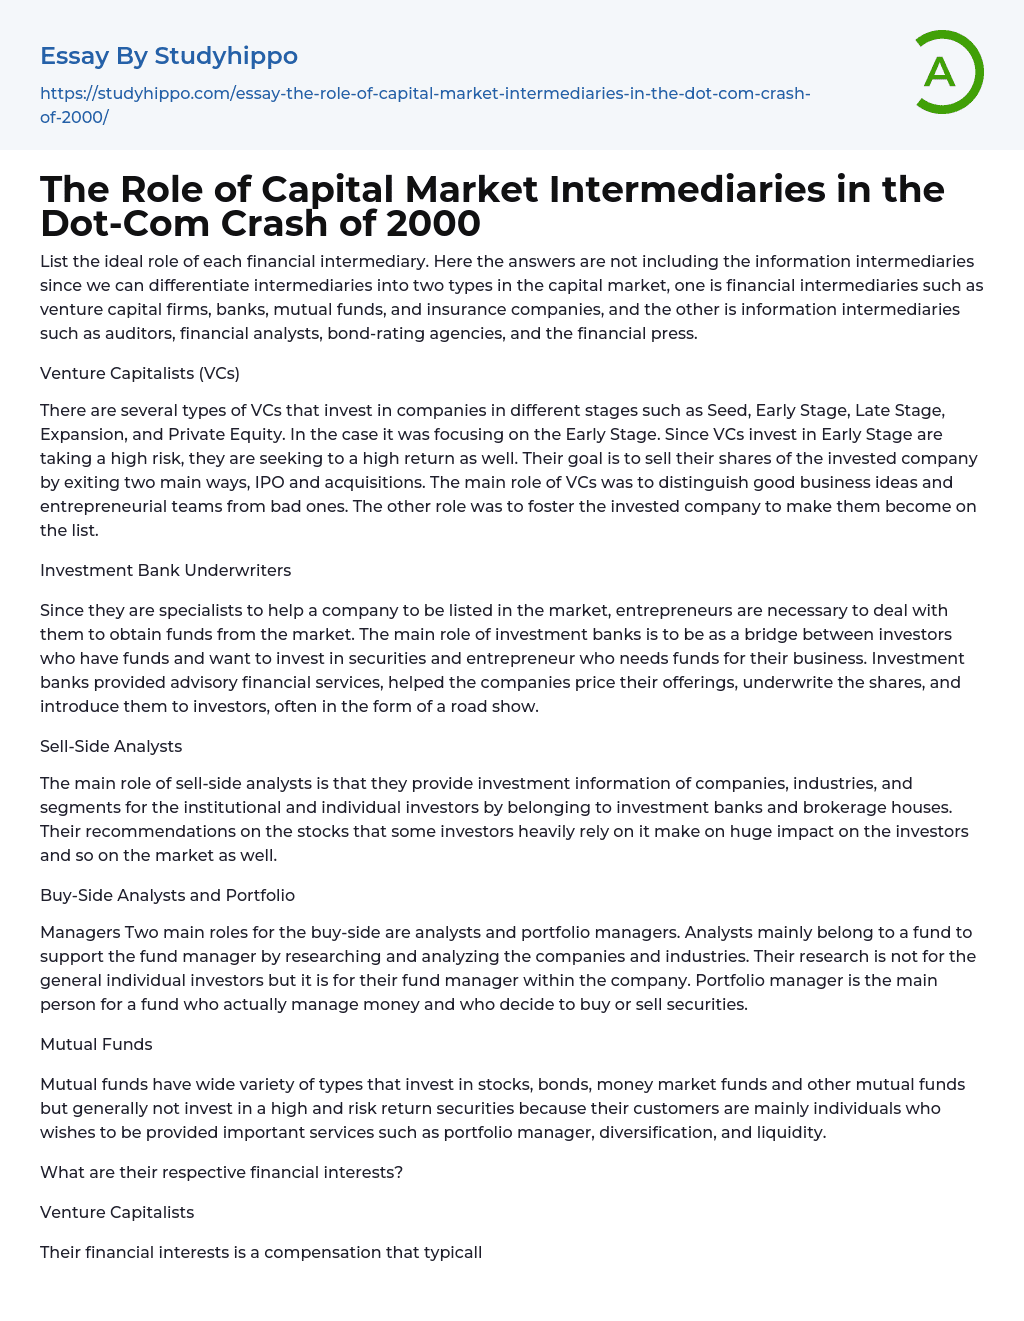 The Role of Capital Market Intermediaries in the Dot-Com Crash of 2000 Essay Example